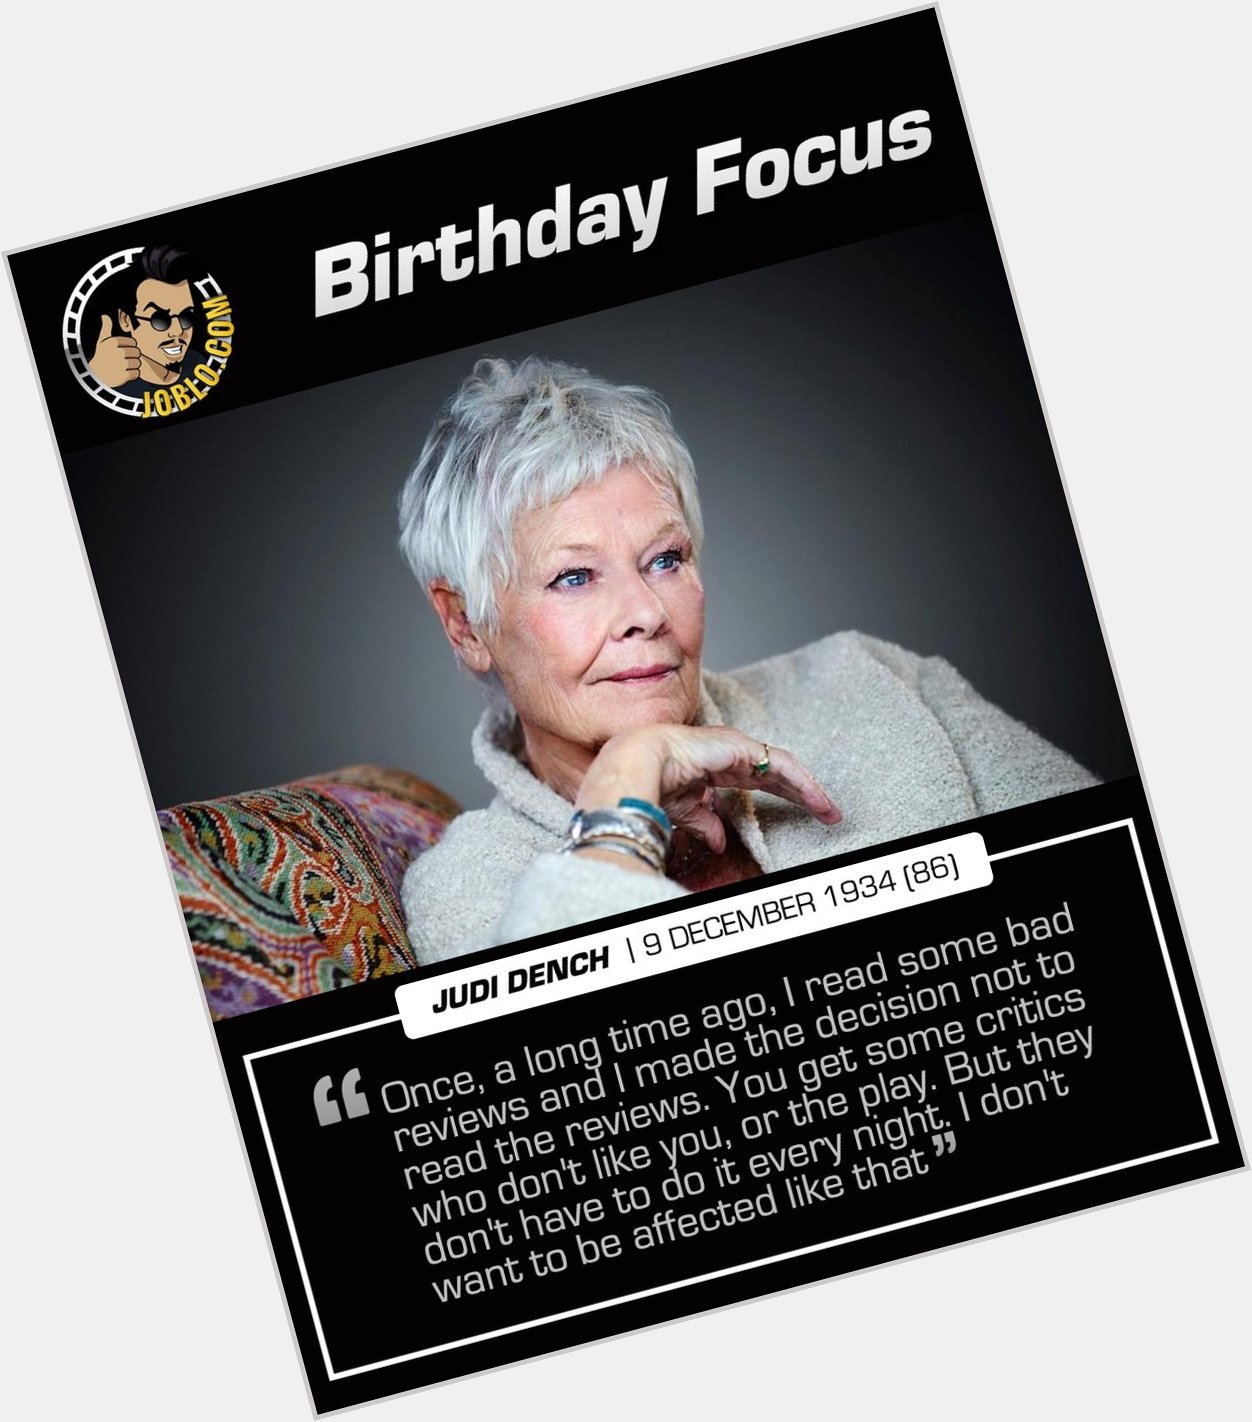 Happy 86th birthday to Judi Dench!

What do you think is her best ever performance? 